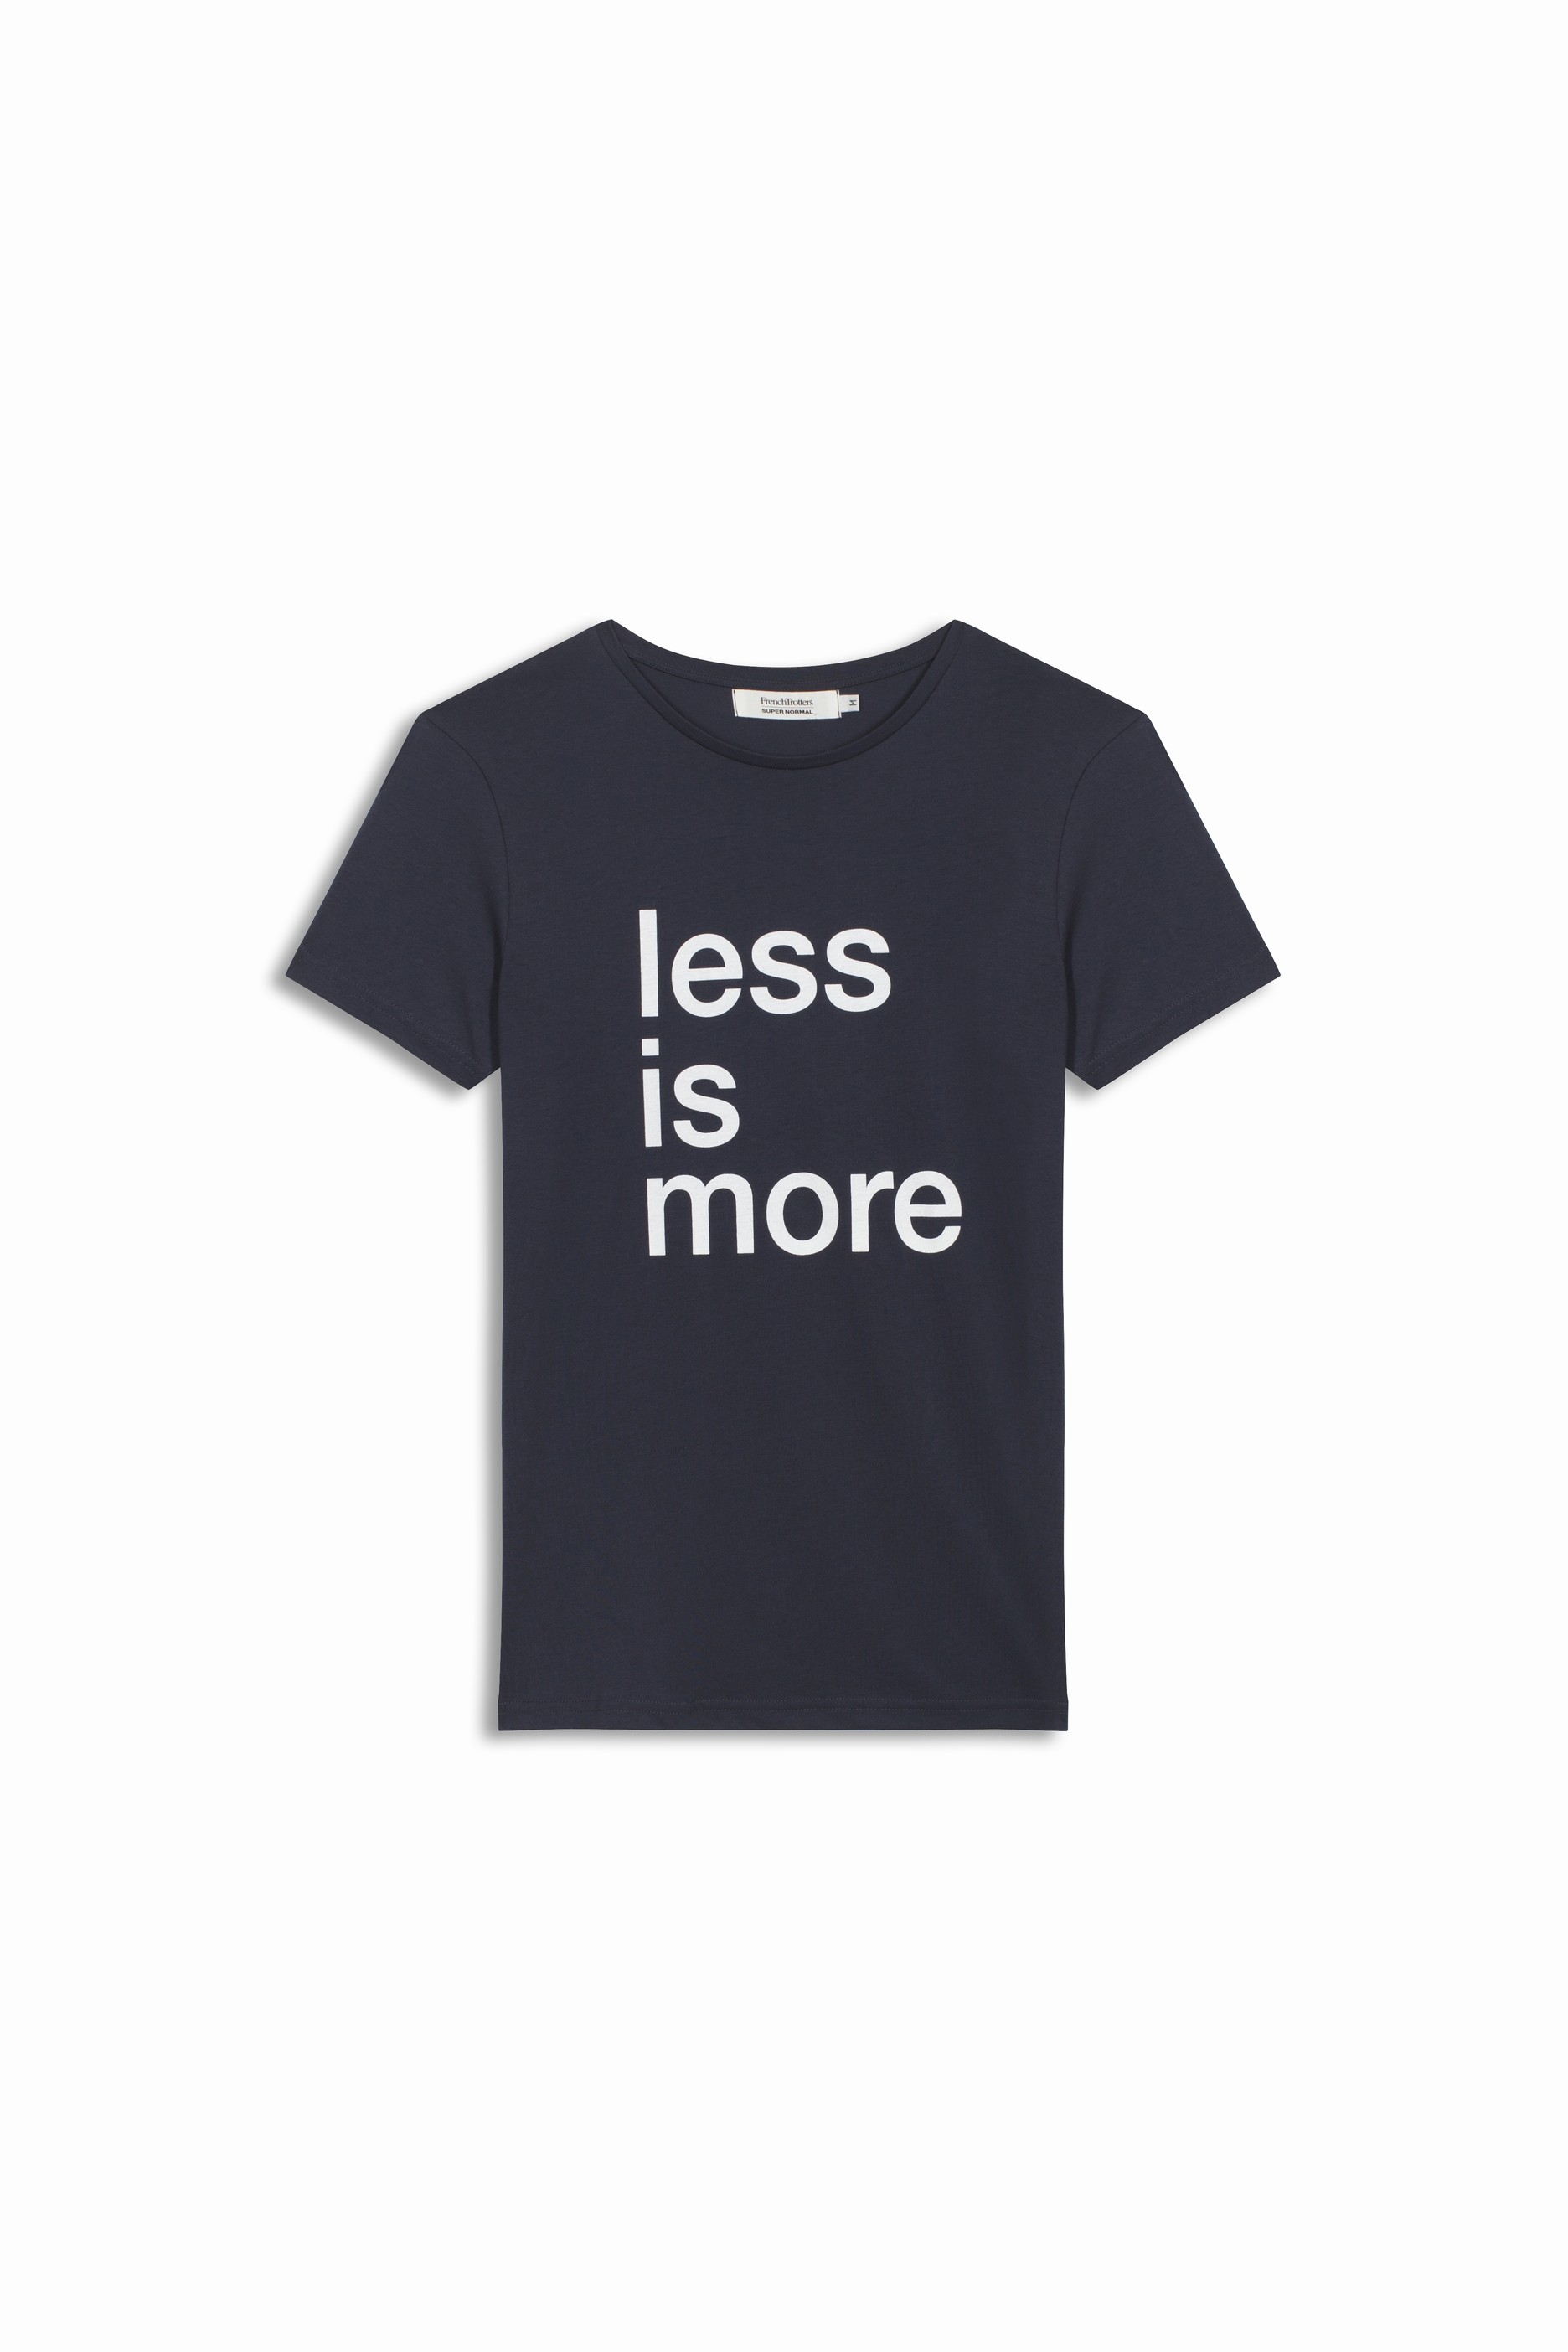 MARK LESS IS MORE - NAVY